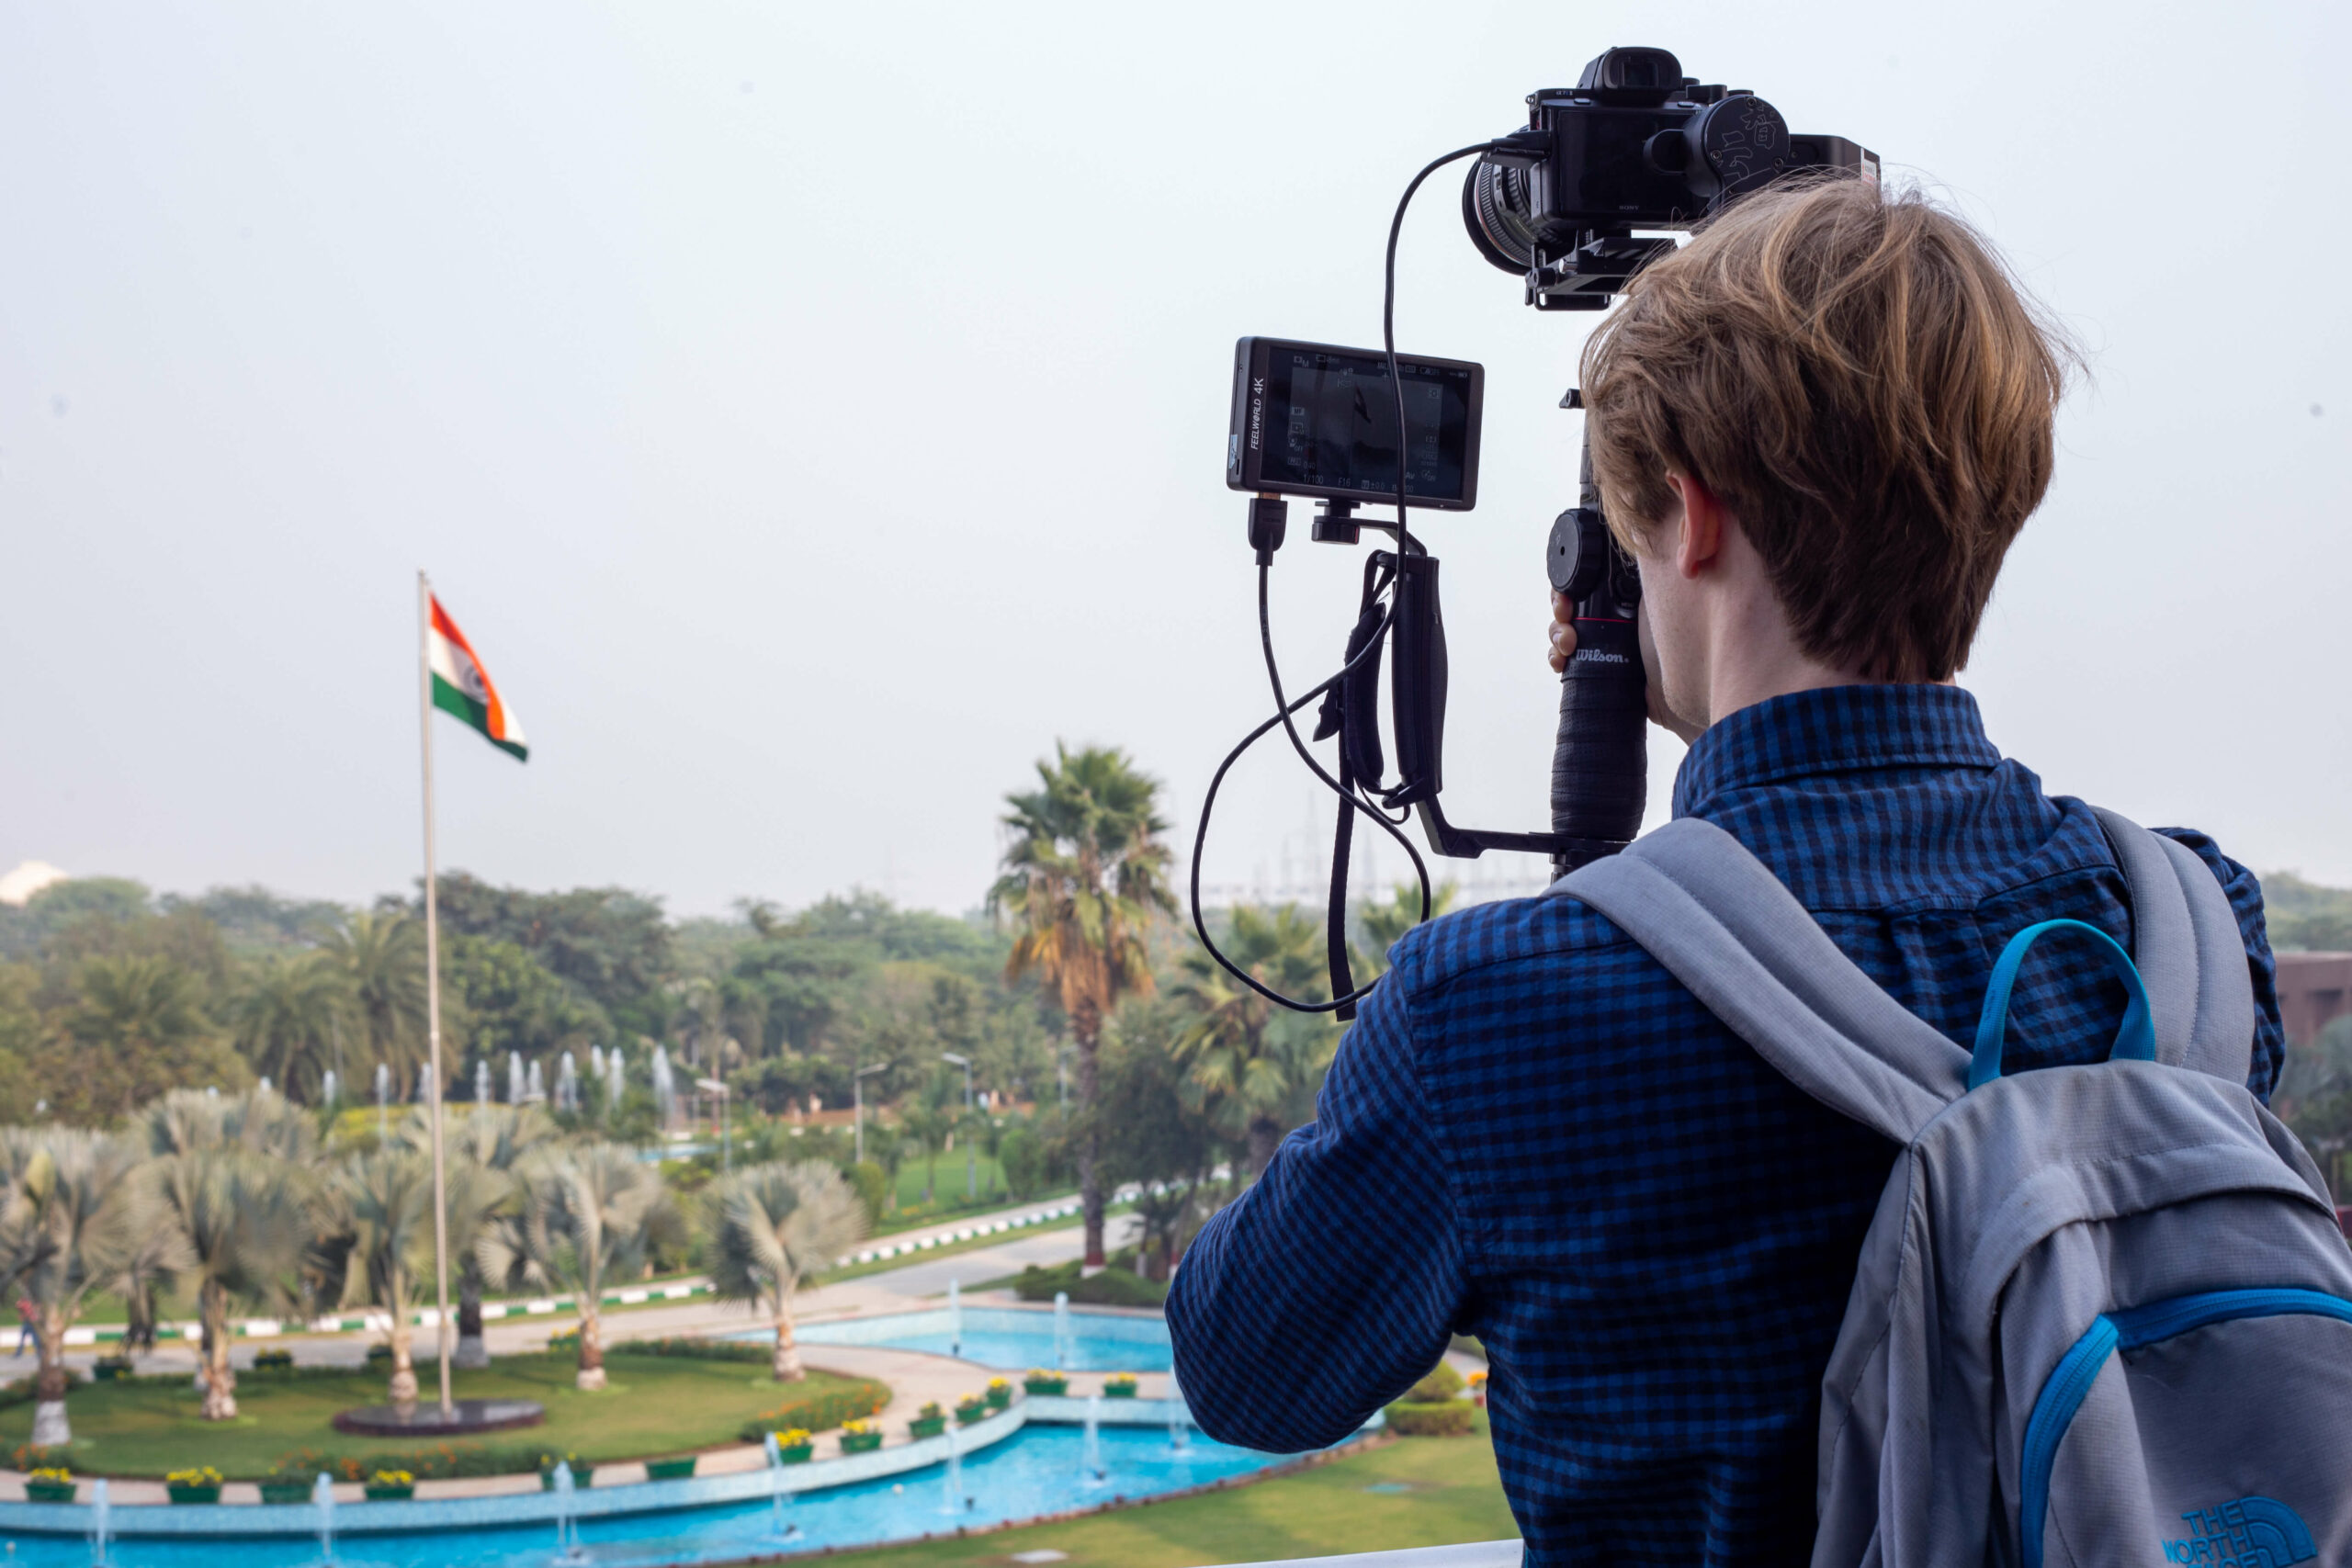 filming in india